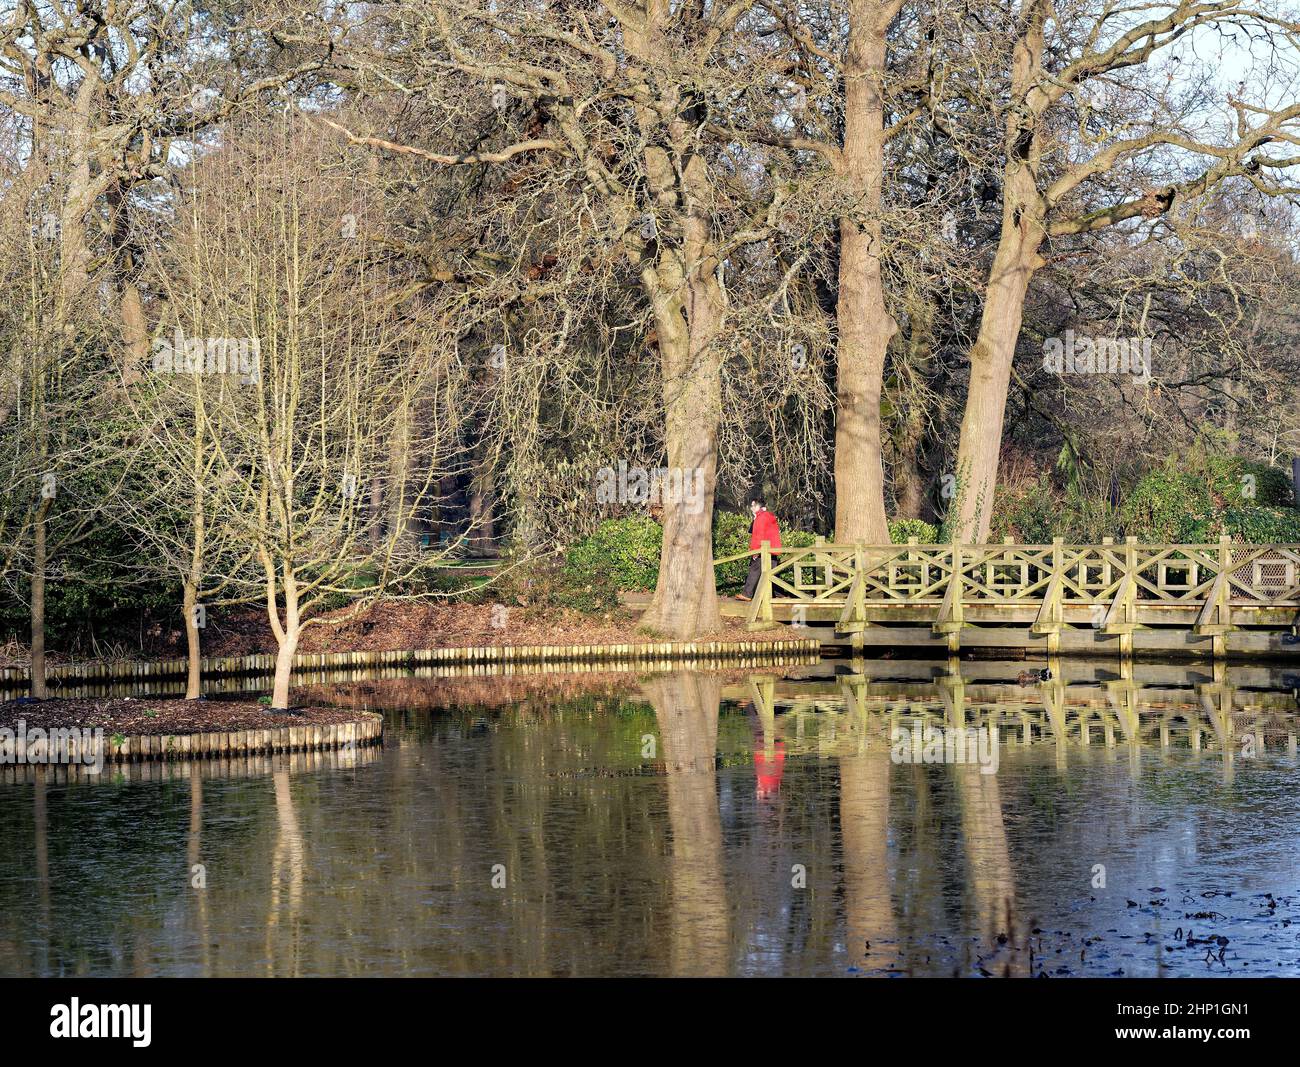 A male figure in a red jacket walking across a wooden bridge over lake in the Royal Horticultural Gardens at Wisley on a winters day Surrey England UK Stock Photo